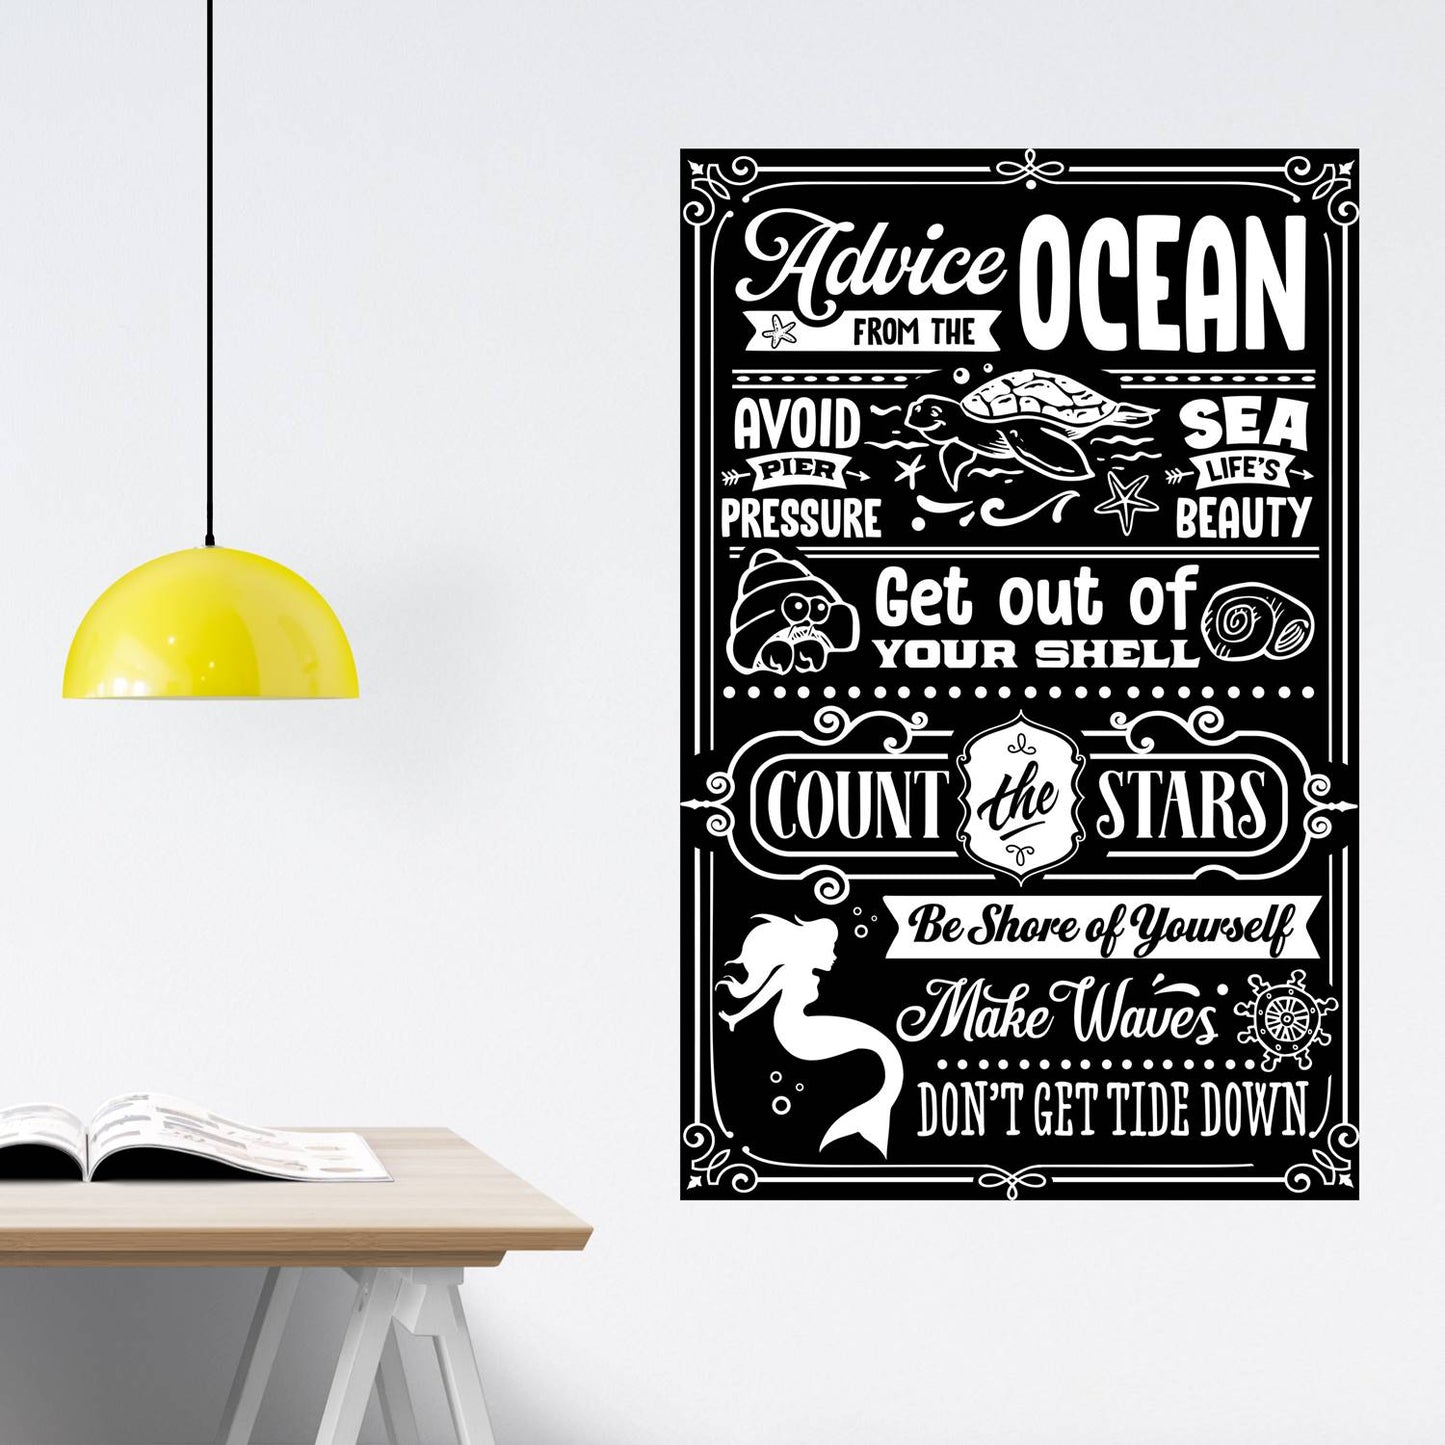 advice from the ocean wall decal